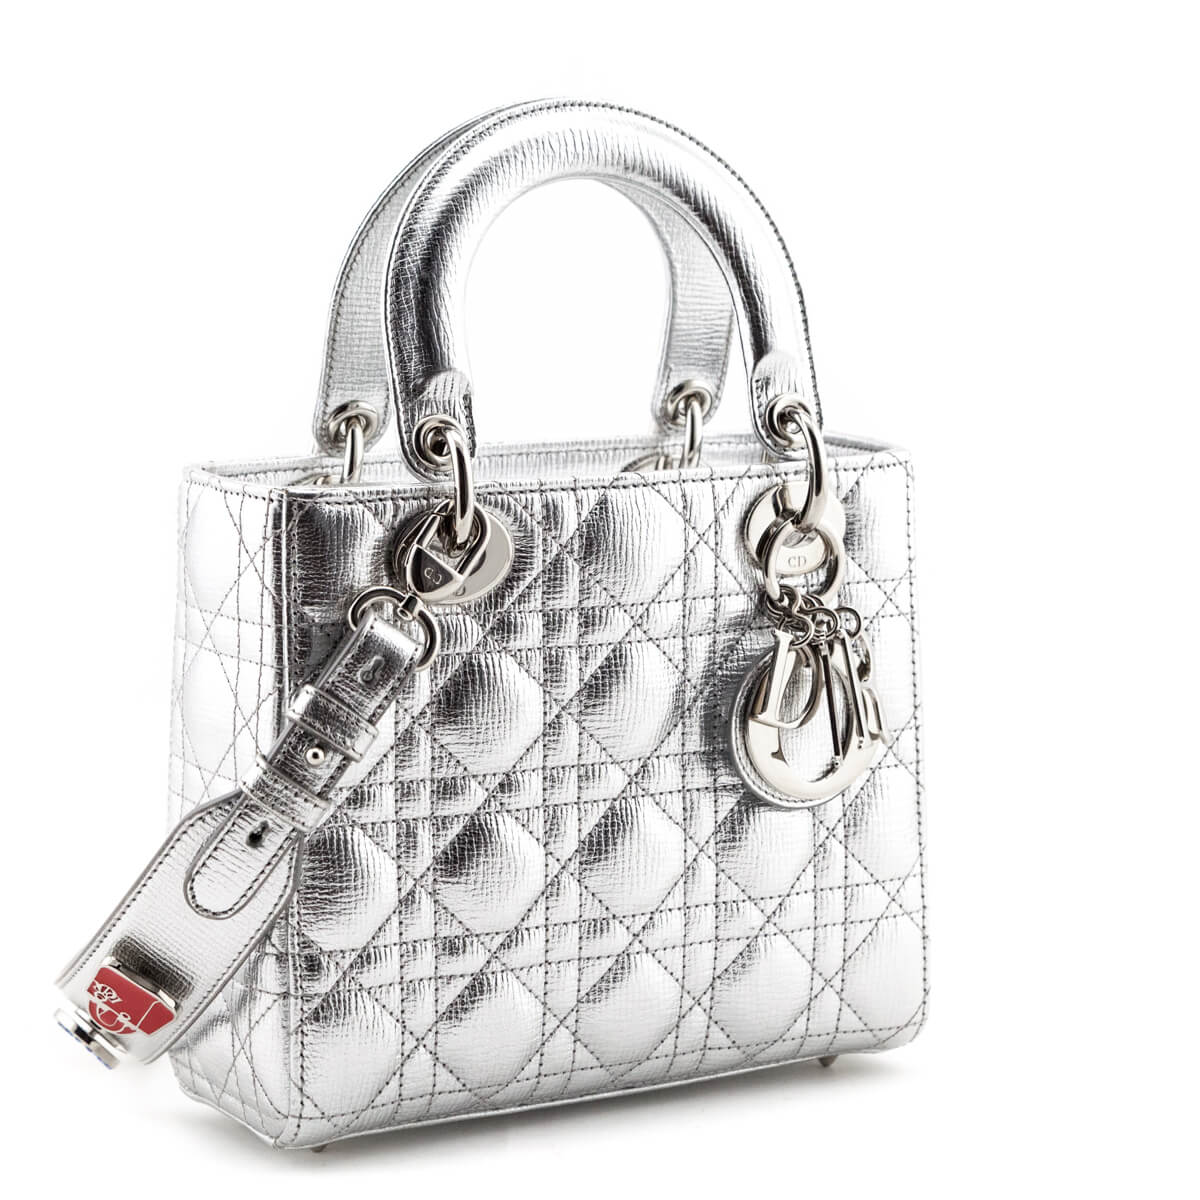 Dior Silver Cannage Cruise 2017 Collection Small Lady Dior Bag - Love that Bag etc - Preowned Authentic Designer Handbags & Preloved Fashions